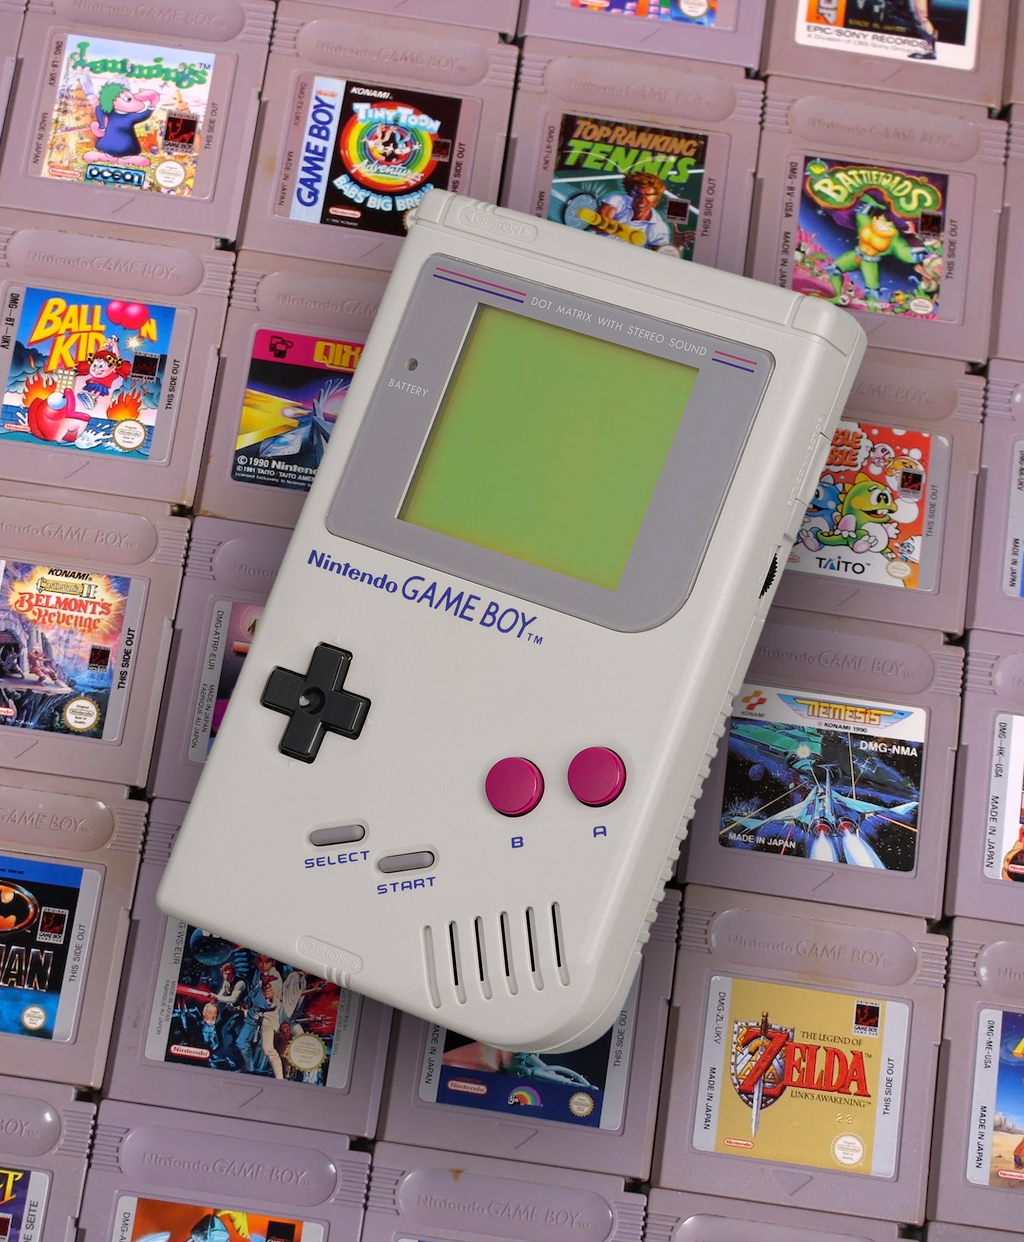 Nintendo Game Boy in front of Assorted Games Cartridges